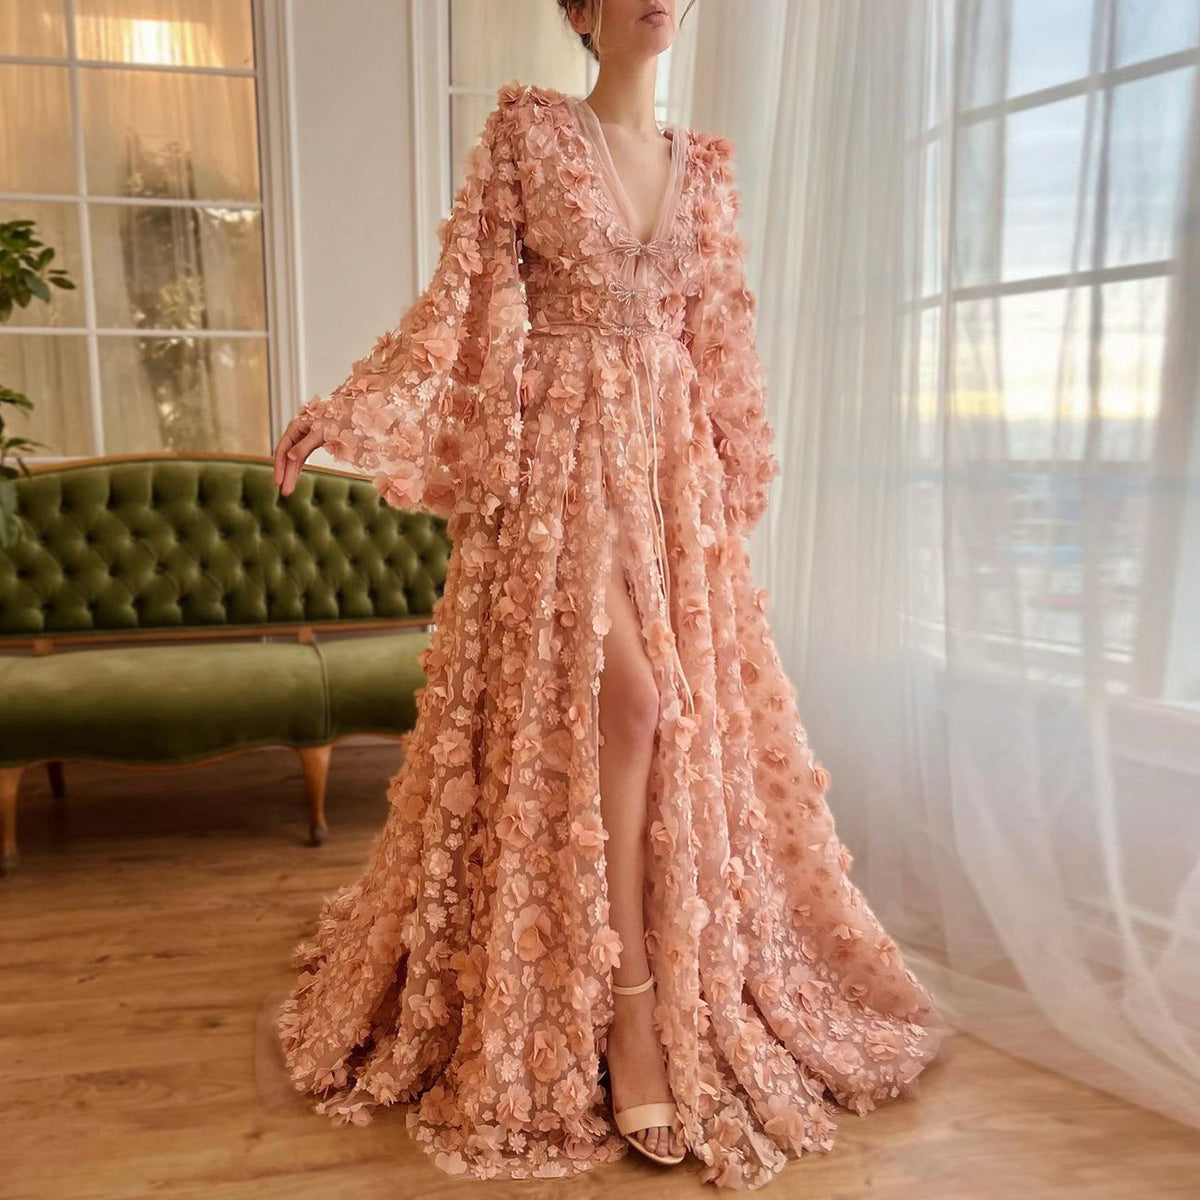 Sharon Said Blush Peach-Pink 3D Flowers Evening Dresses with Bell Long Sleeves V-Neck Arabic Wedding Party Birthday Gowns SS295